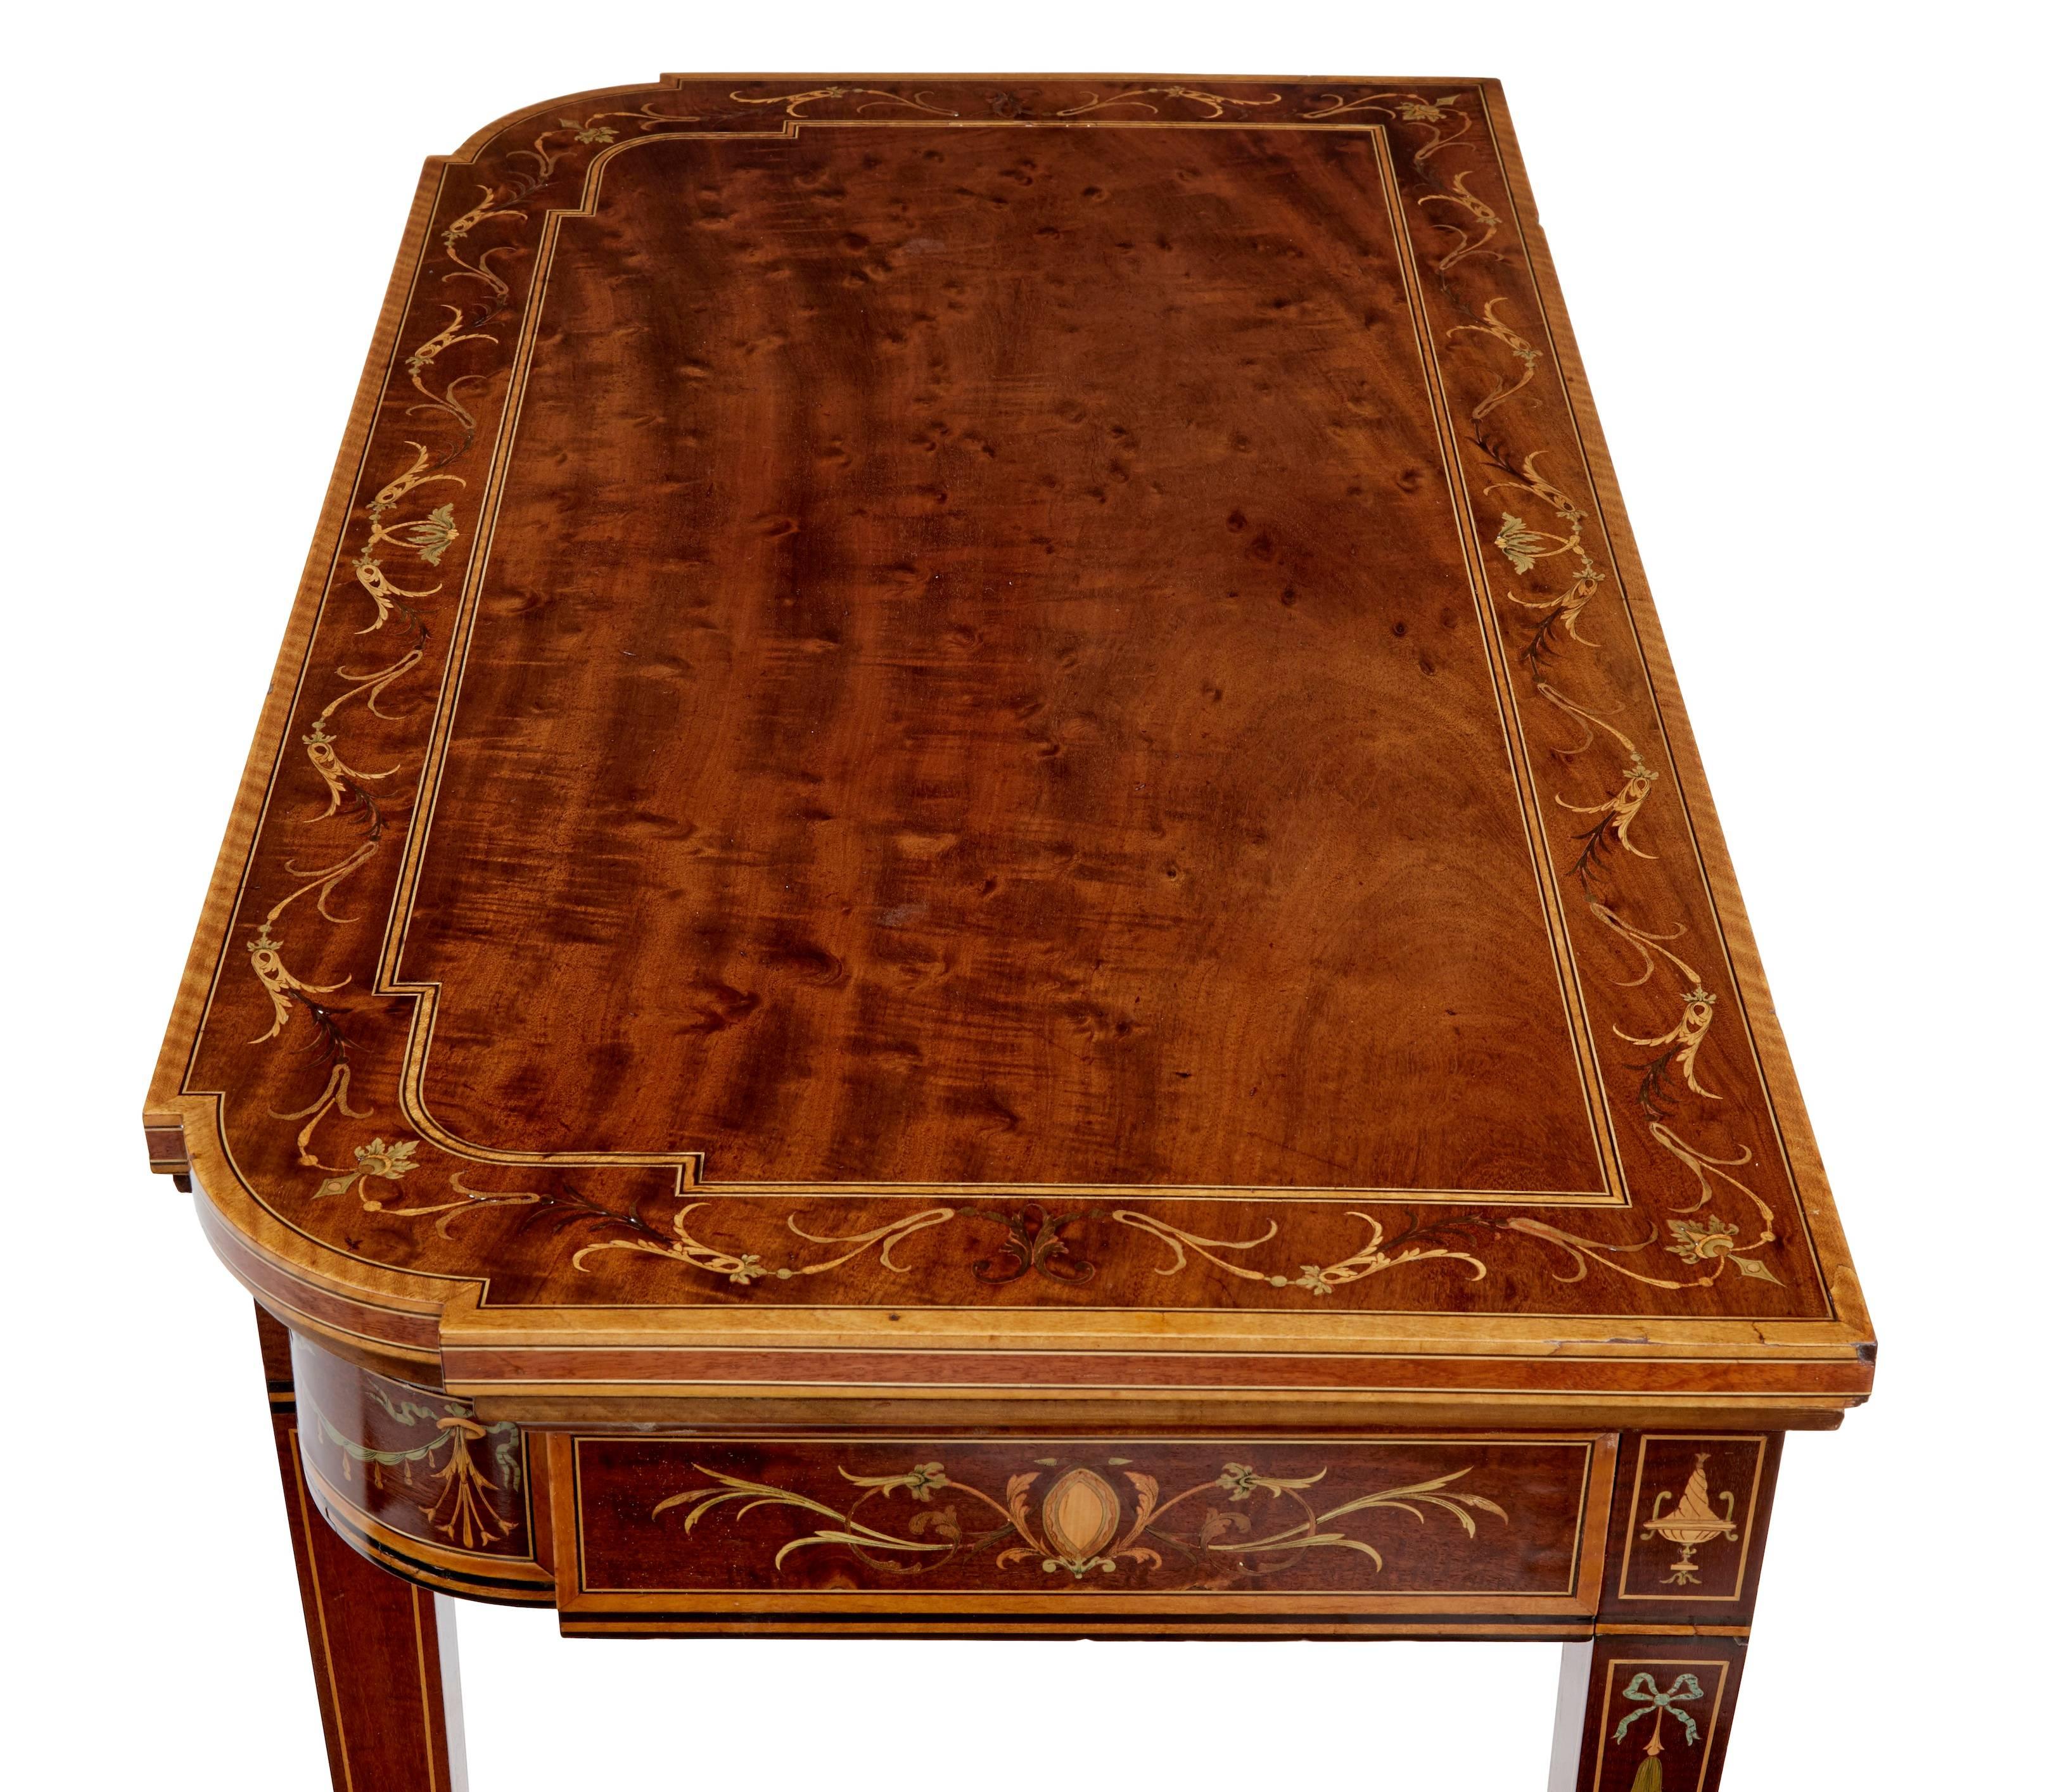 British Late 19th Century Inlaid Mahogany Card Table by Edwards and Roberts